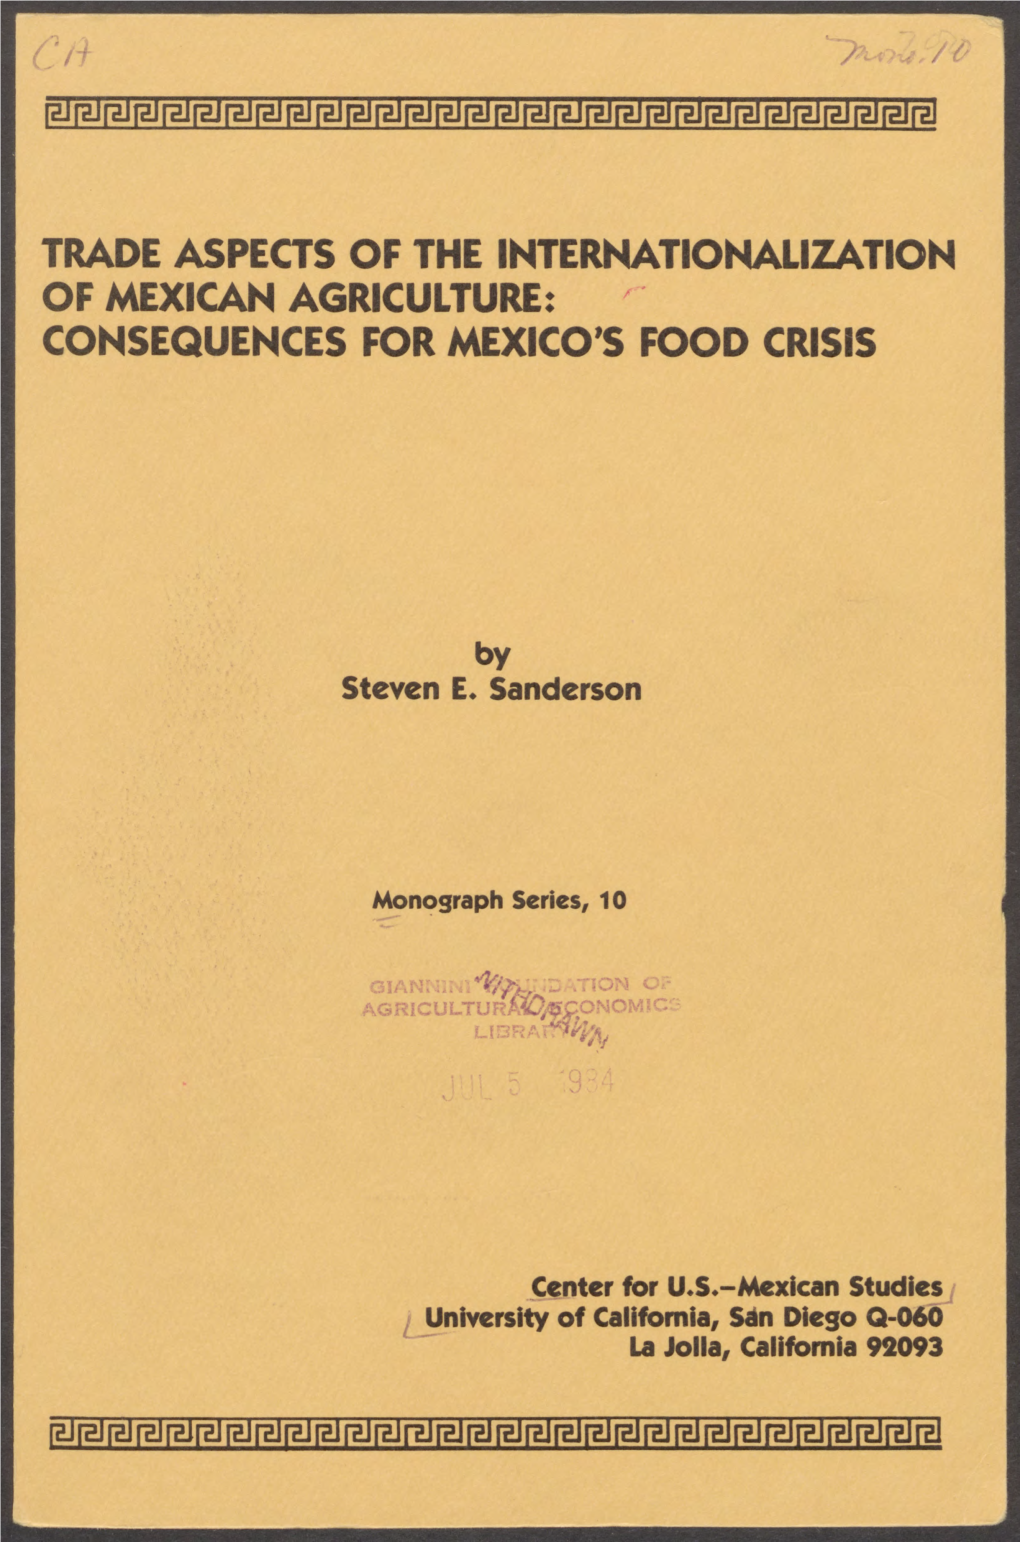 Trade Aspects of the Internationalization of Mexican Agriculture: Consequences for Mexico's Food Crisis